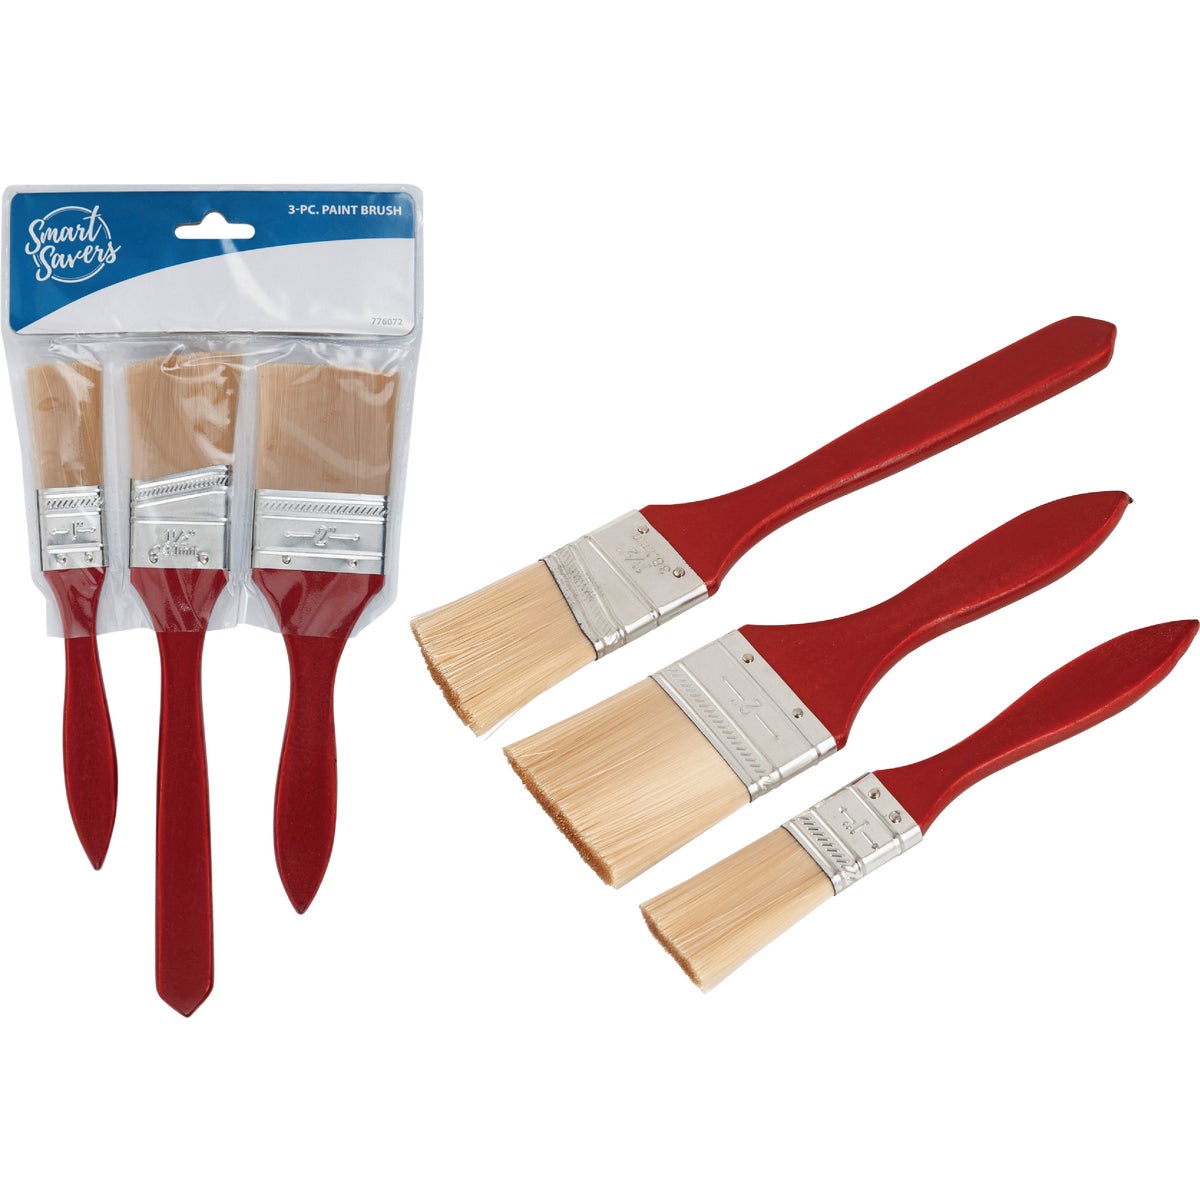 Item 776072, Paint brush set. Set contains: 1 In. flat, 1-1/2 In. flat, and a 2 In.